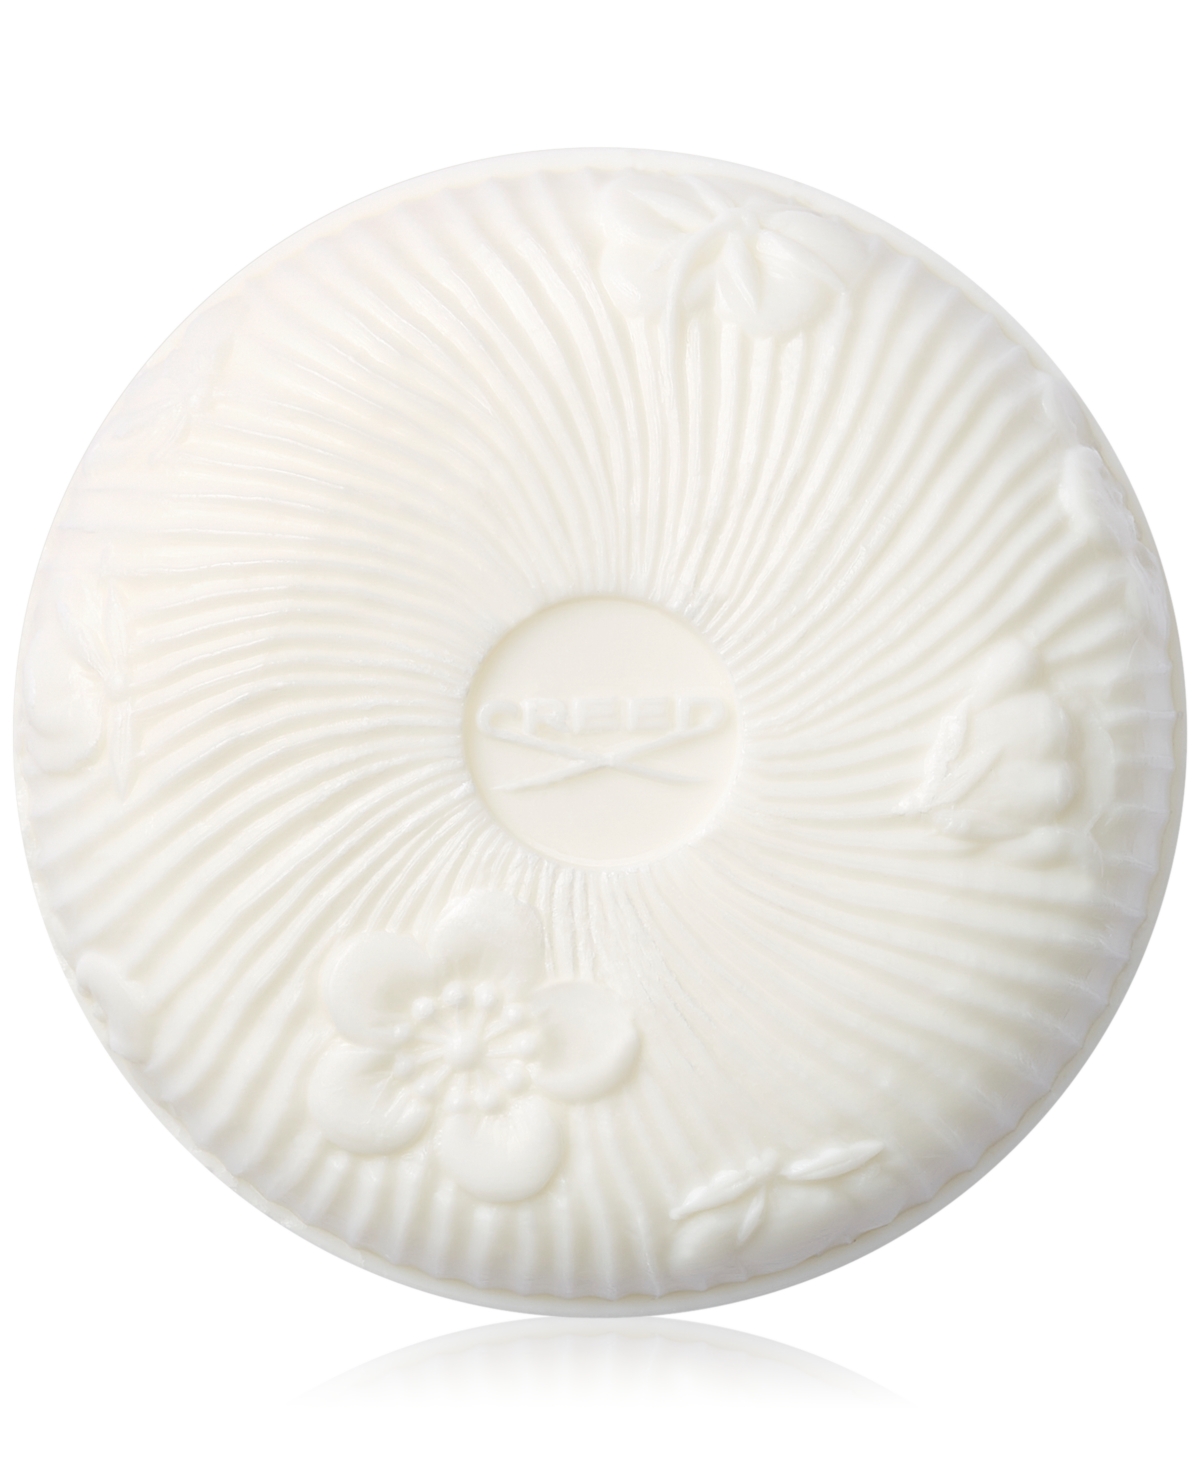 Creed Aventus For Her Soap, 5.3 Oz.